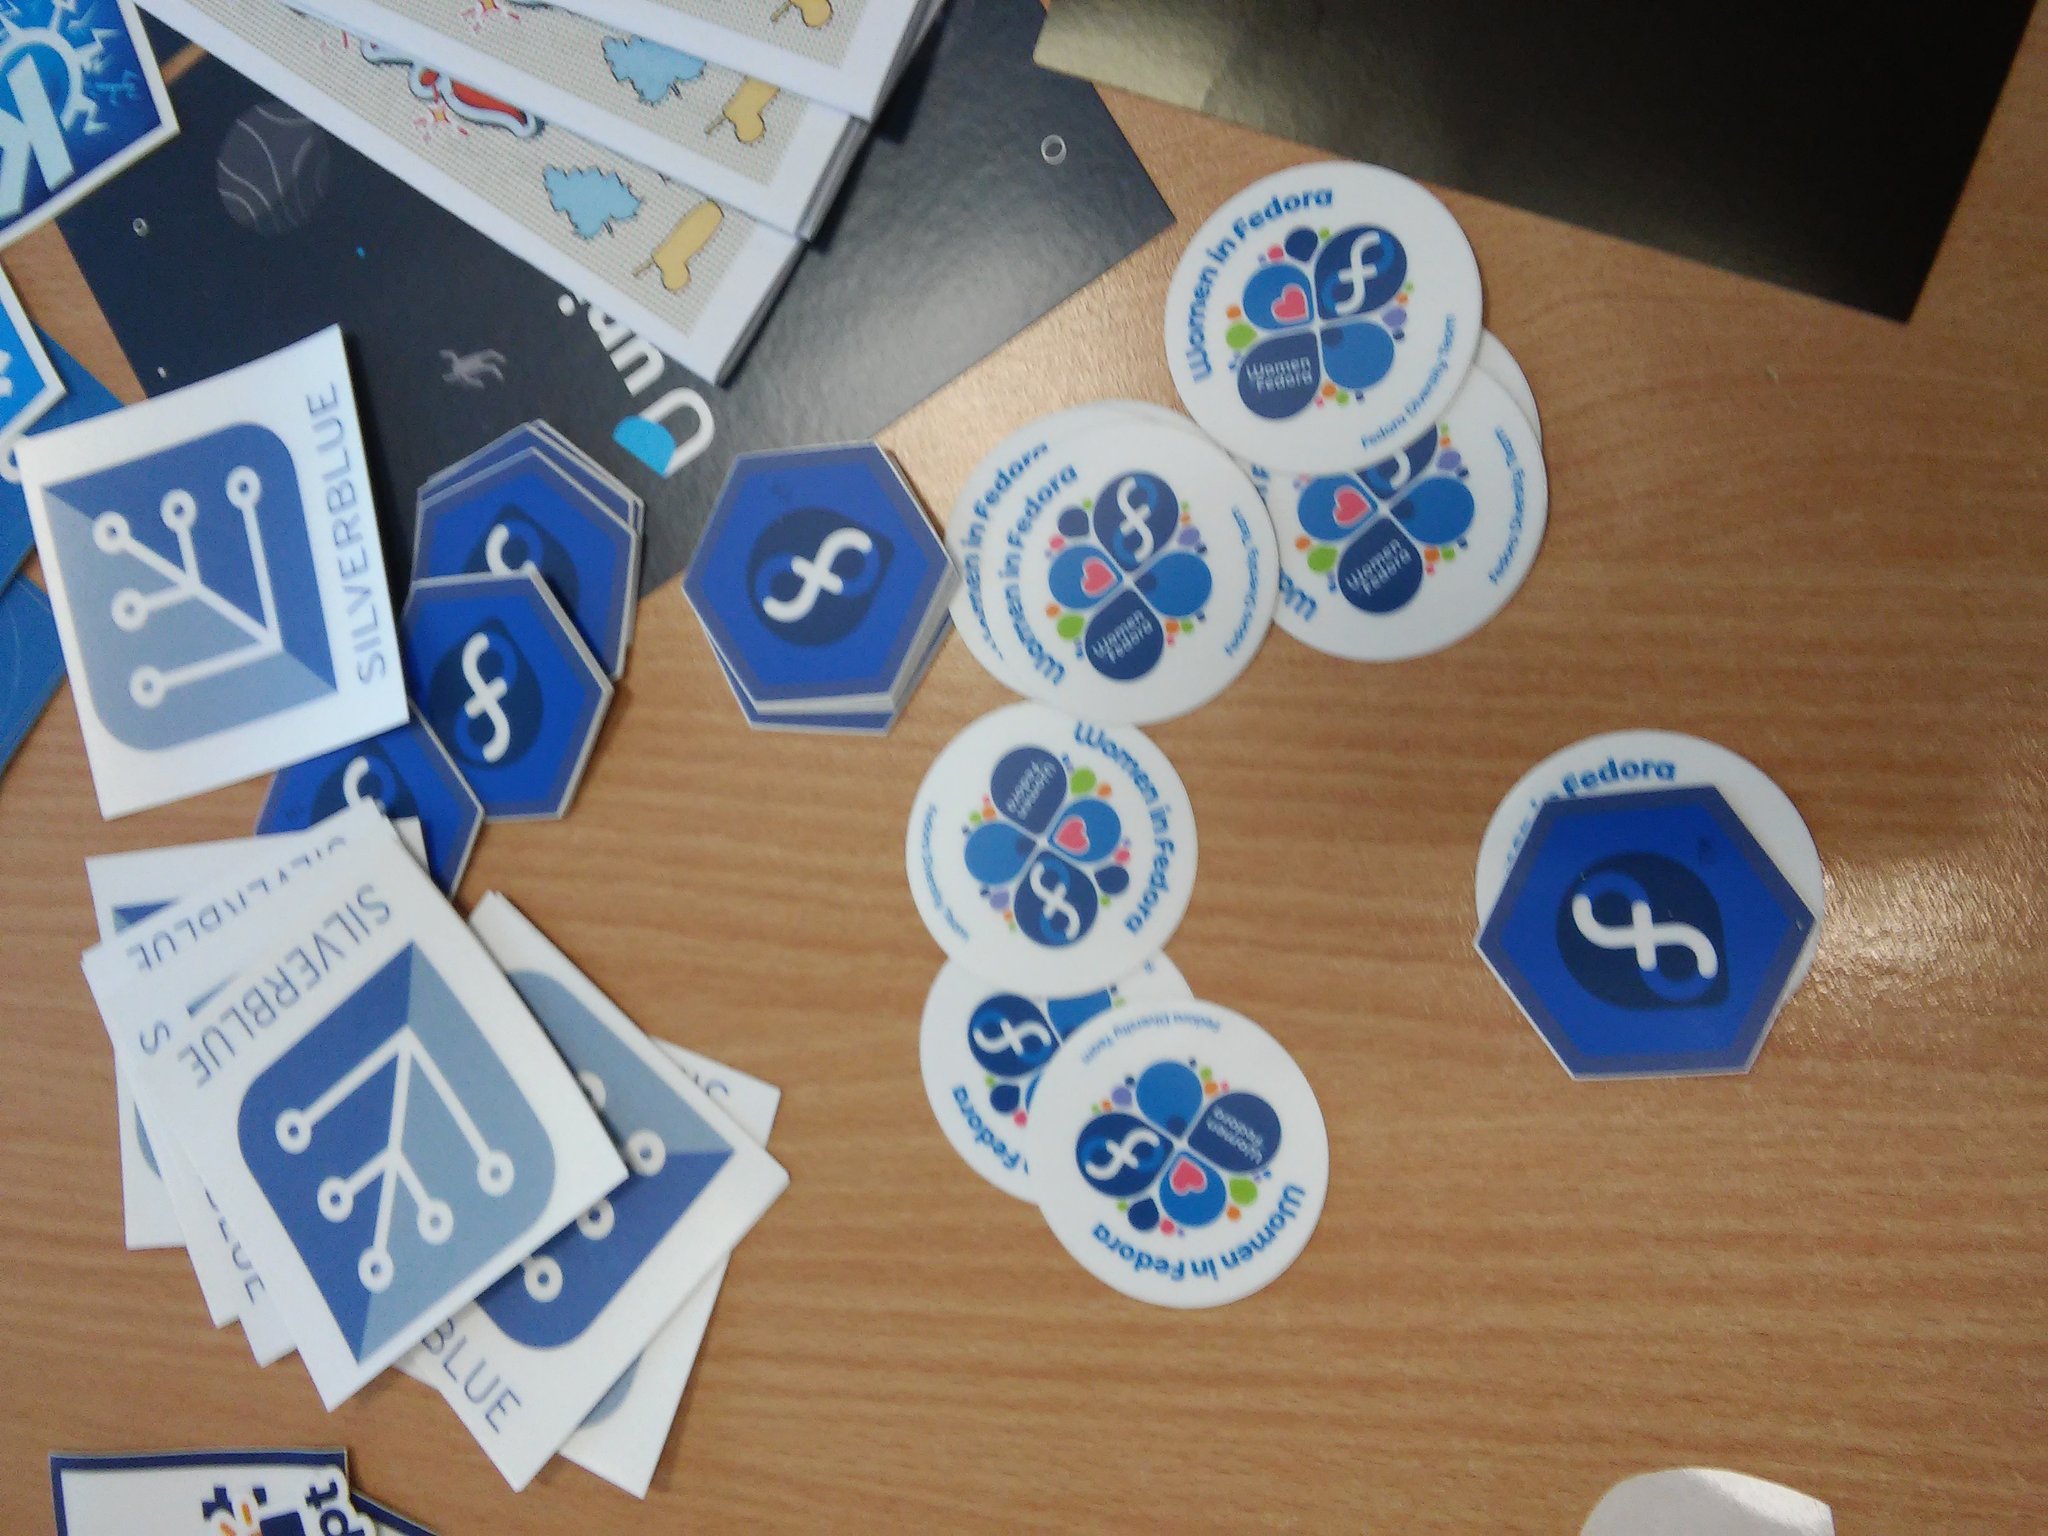 Picture of Fedora stickers on a table